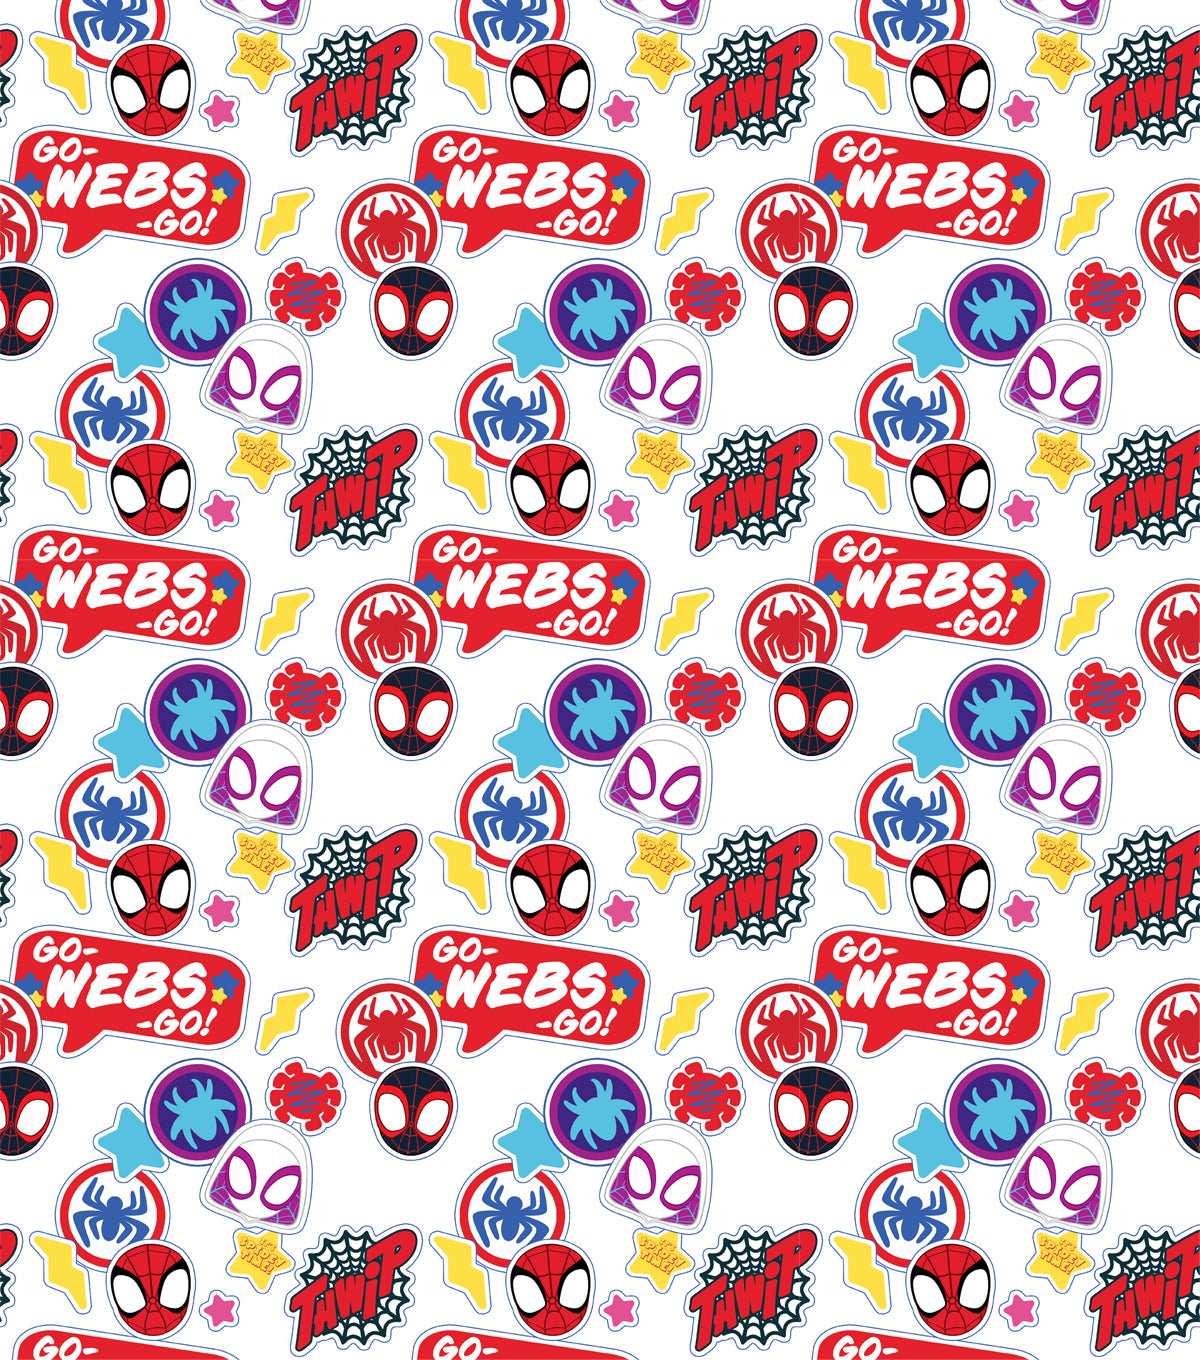 Marvel's Spidey and His Amazing Friends Word Pop Fabric